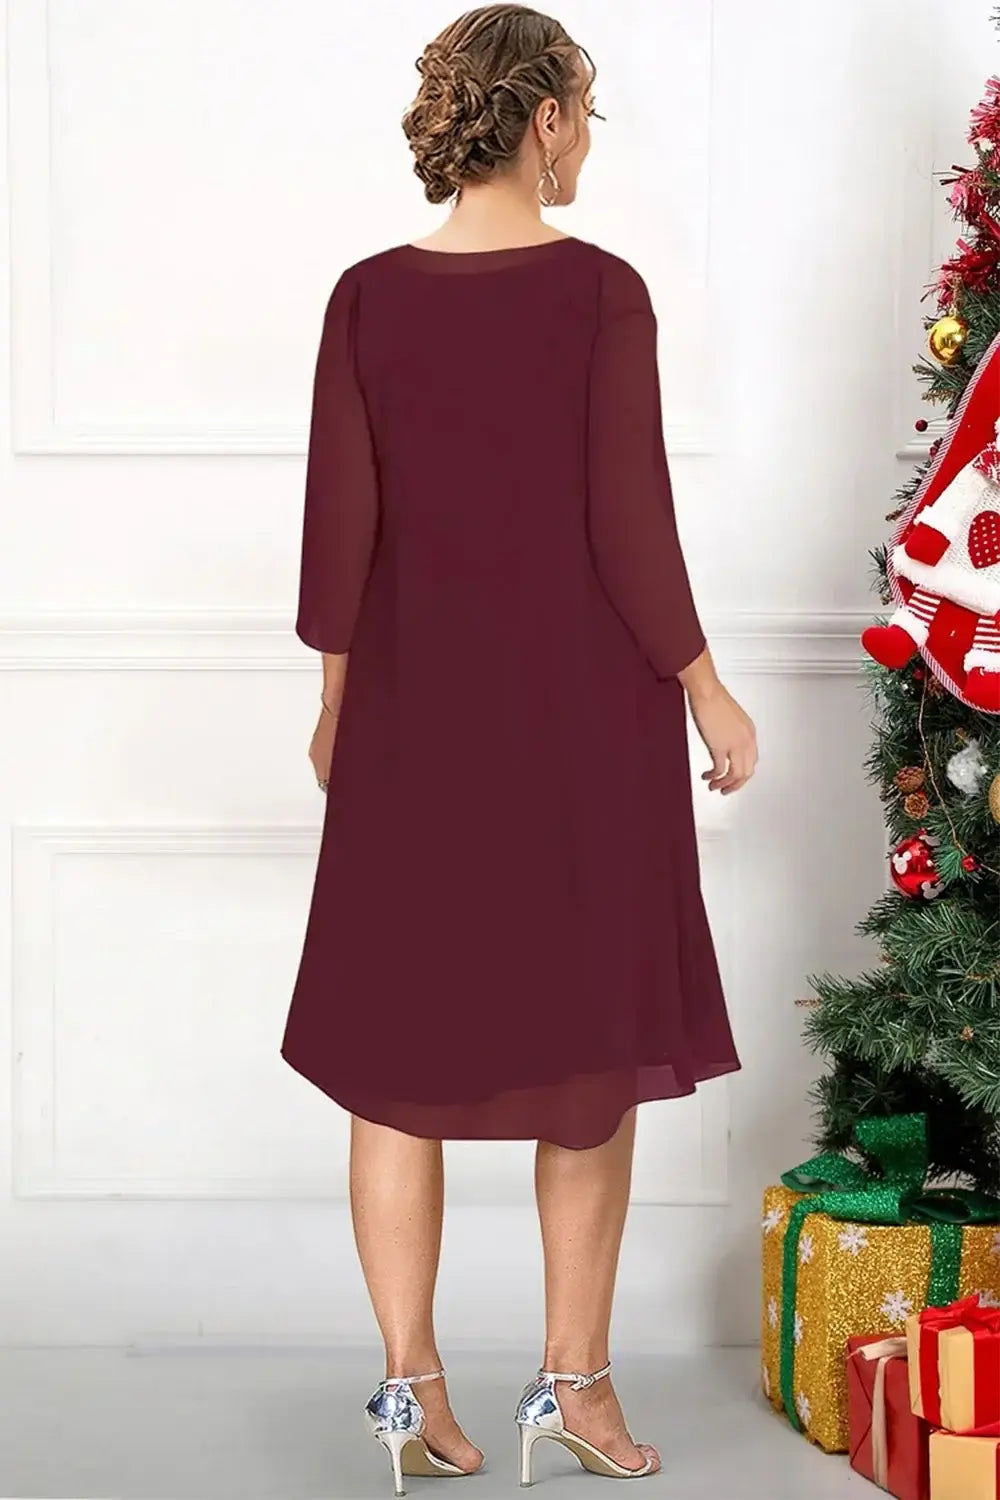 The Bride Formal Burgundy Two Pieces Midi Dress With Jacket